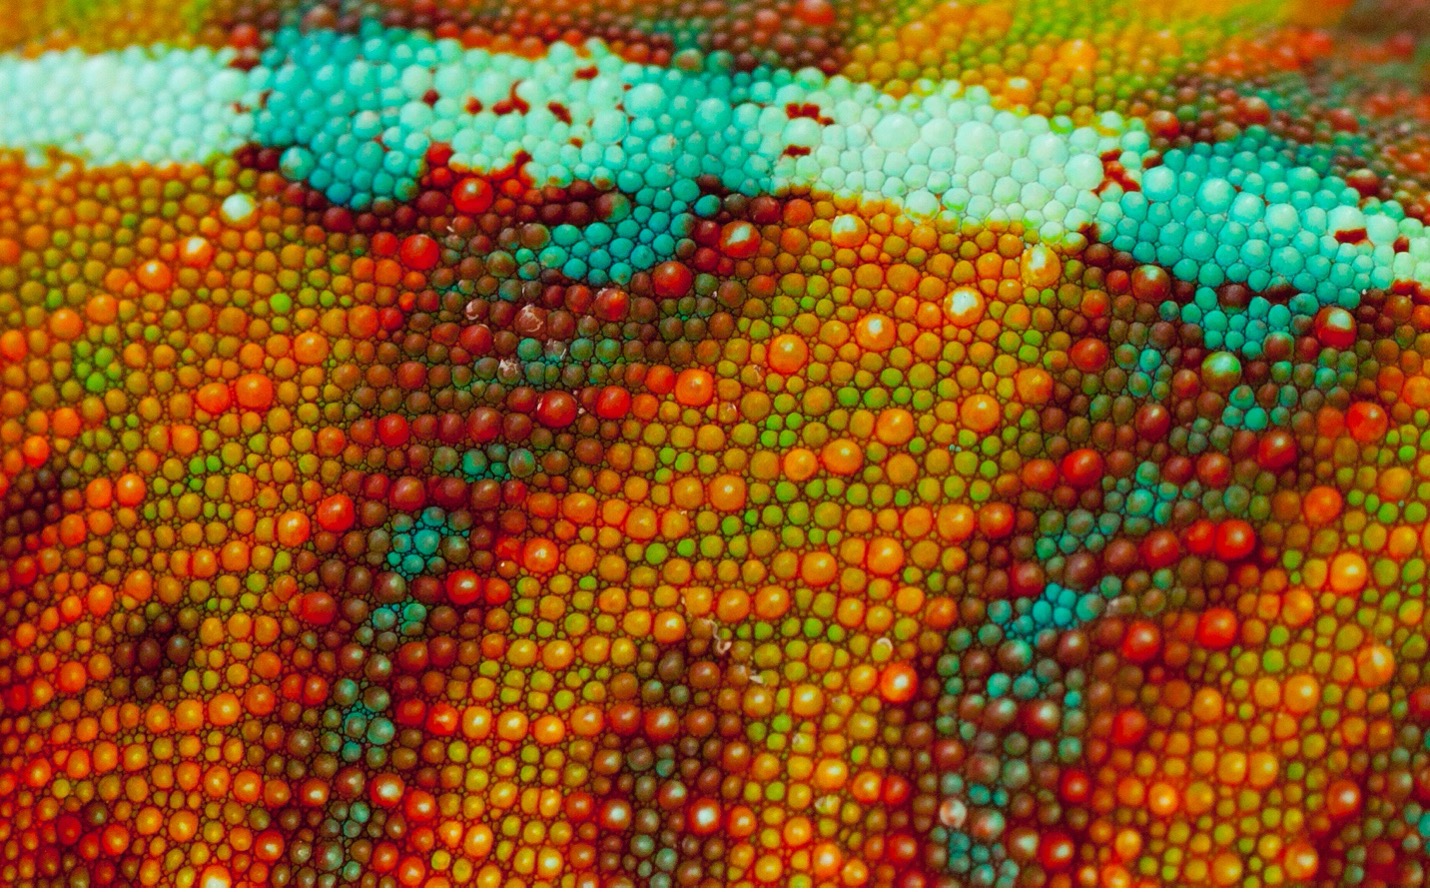 a highly textured and colorful photo of chameleon skin